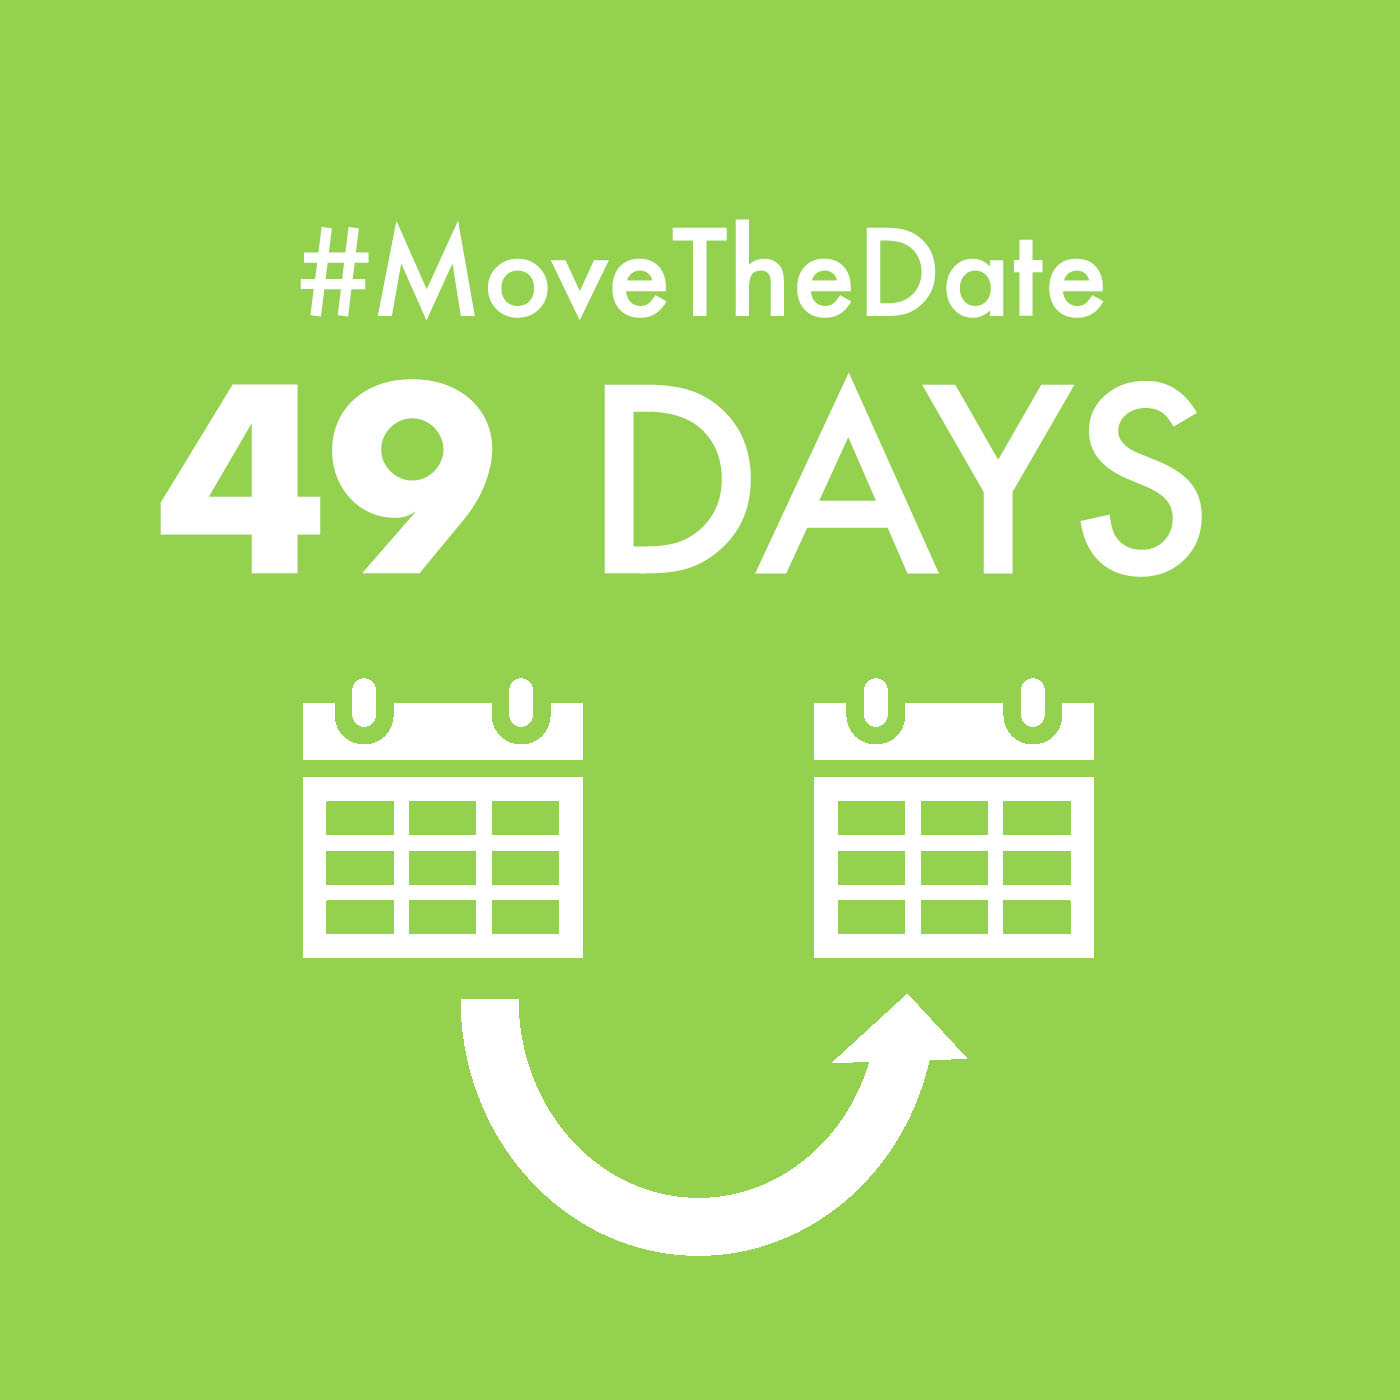 green box with white text - #MoveTheDate 49 days